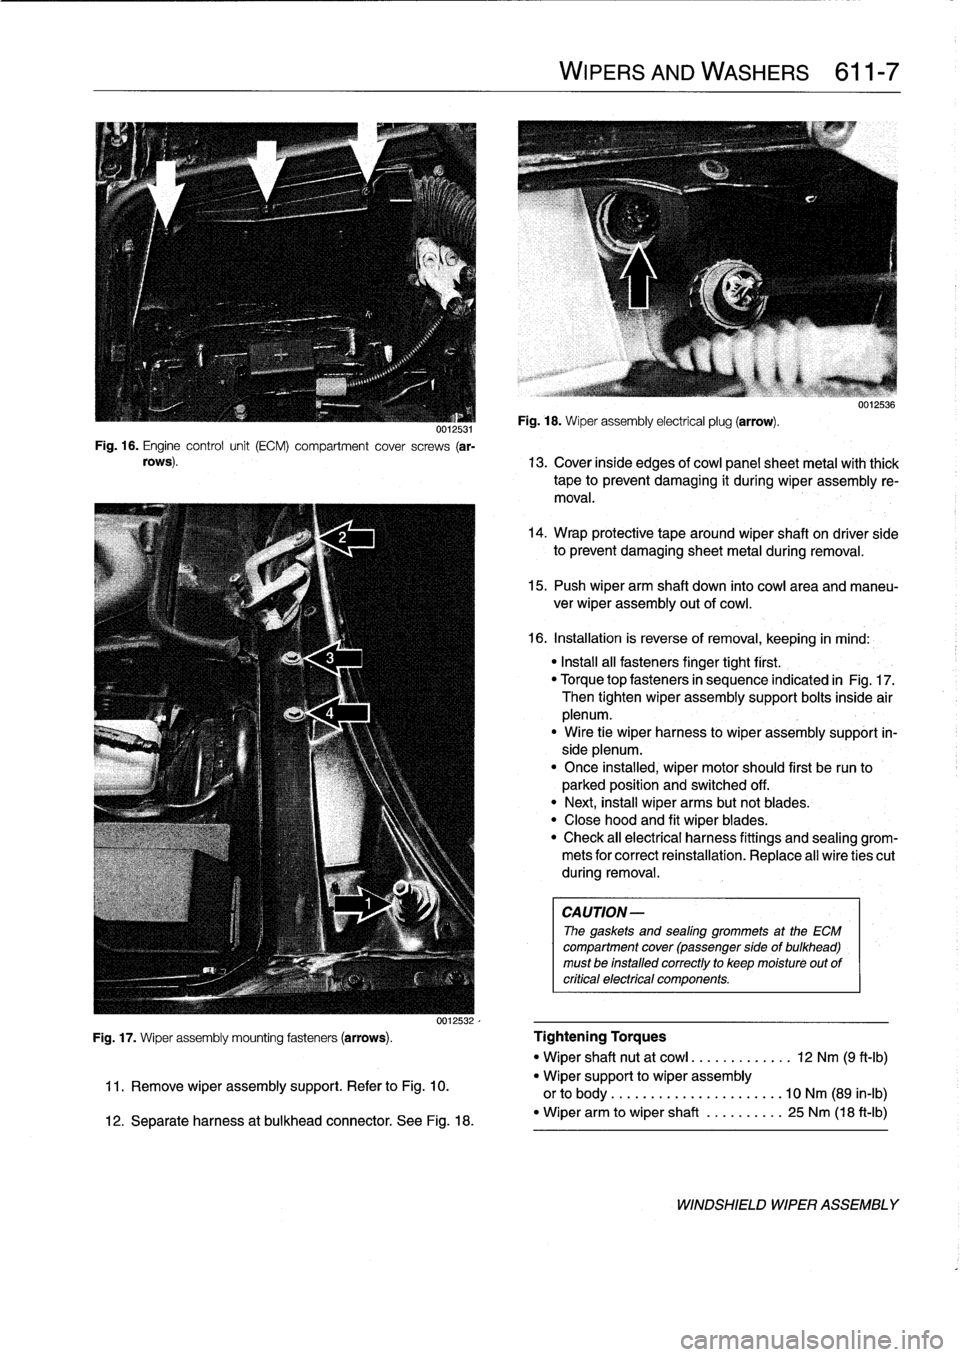 BMW 318i 1997 E36 Workshop Manual 
0012531Fig
.
16
.
Engine
control
unit
(ECM)
compartment
cover
screws
(ar-
rows)
.

WIPERS
AND
WASHERS

	

611-
7

Fig
.
18
.
Wiper
assembly
electrical
plug
(arrow)
.

uu1zbs6

13
.
Cover
inside
edges